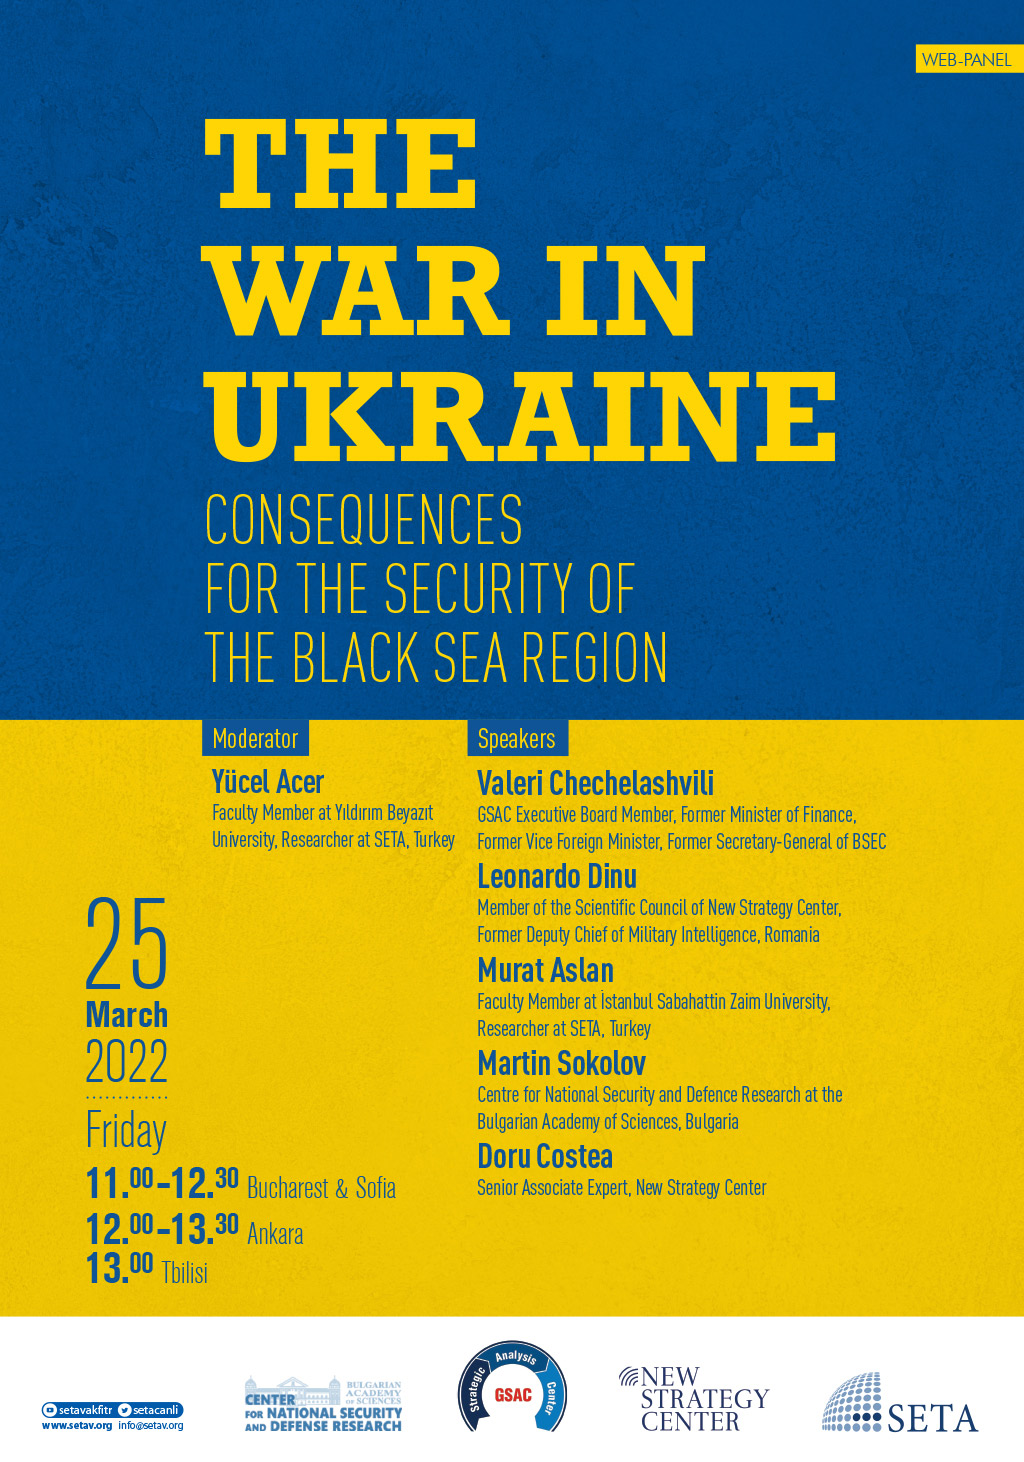 Web Panel: The War in Ukraine | Consequences for the Security of the Black Sea Region